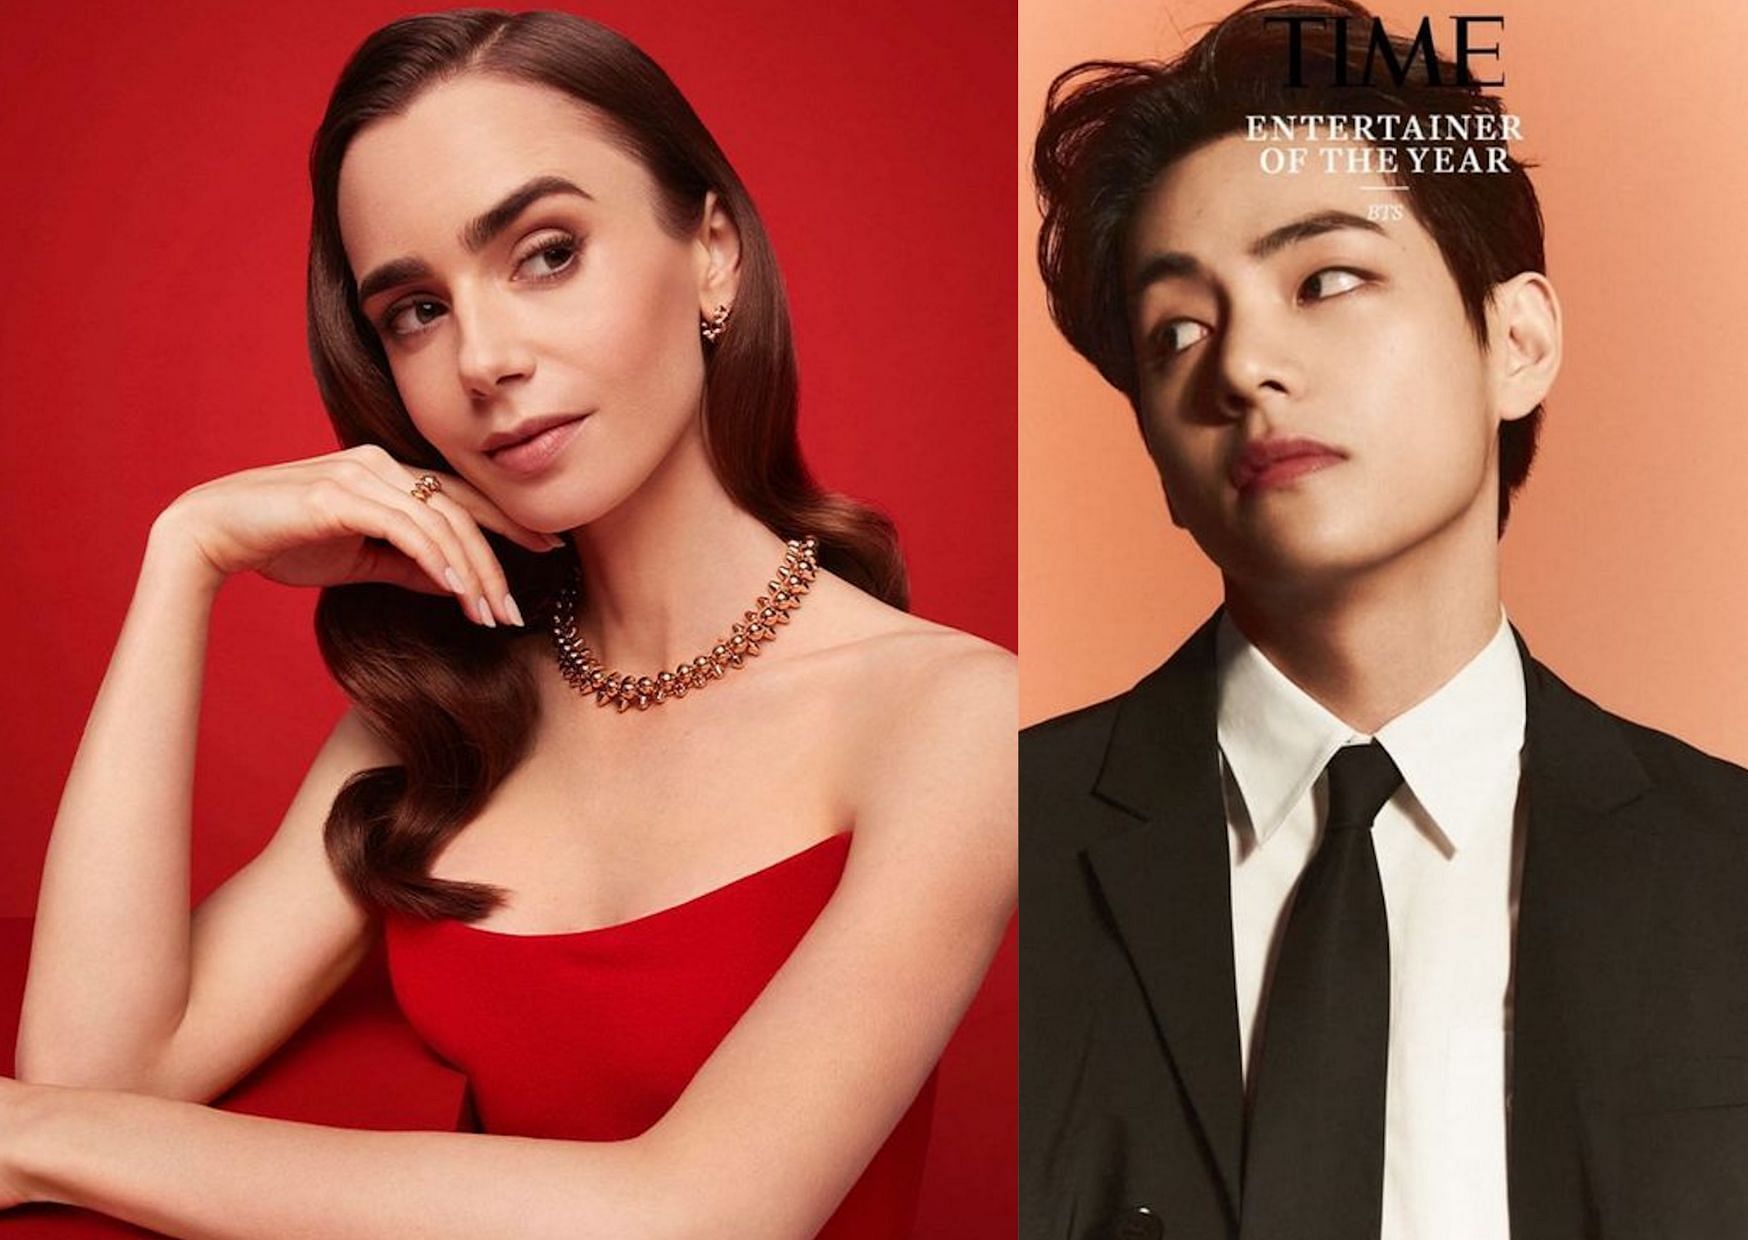 We're in the stars tonight": BTS V's celebrity crush Lily Collins shares  his post on Instagram